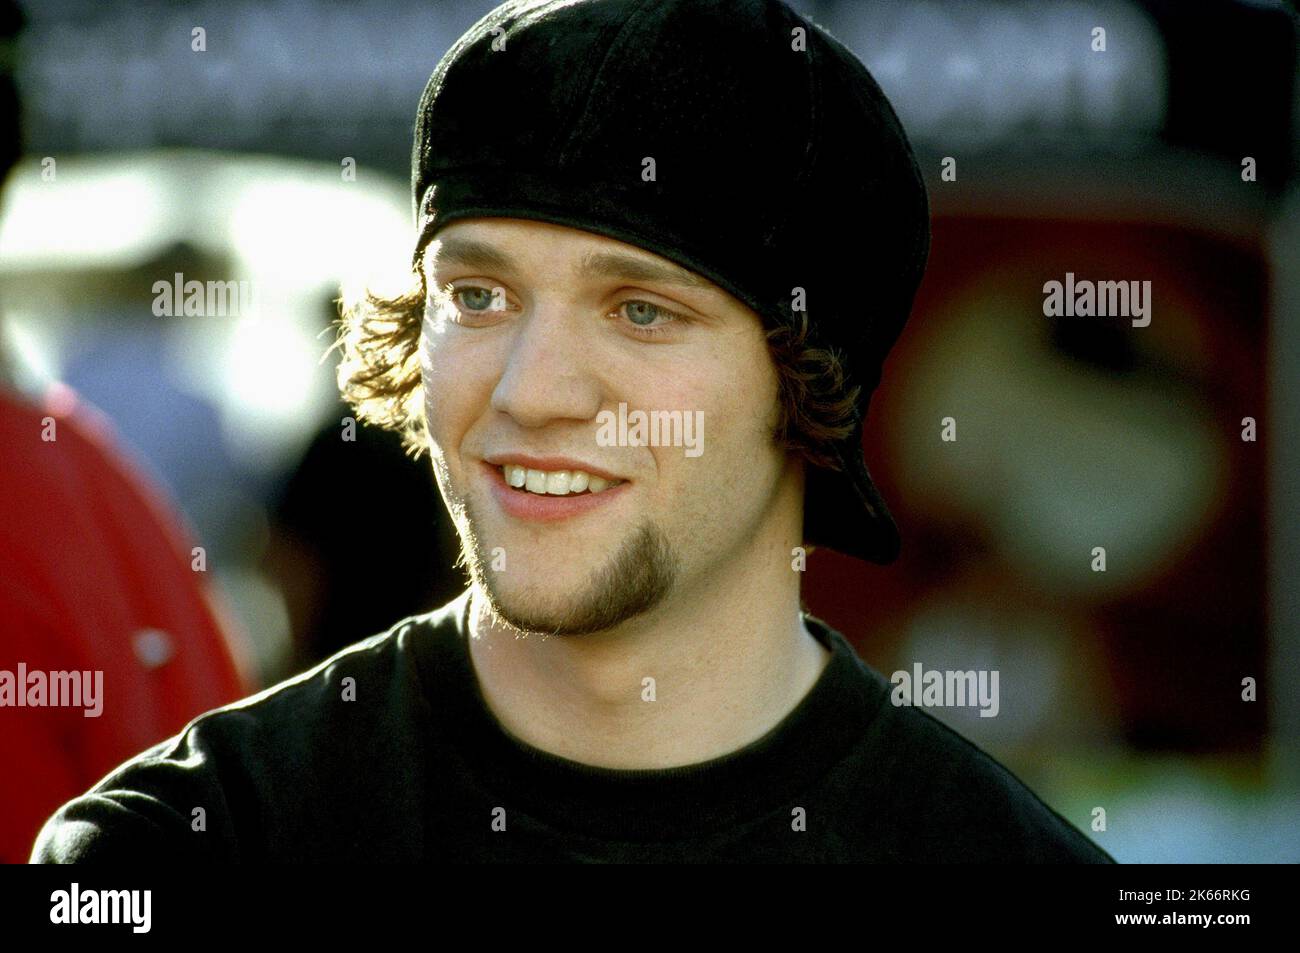 Bam margera 2003 hi-res stock photography and images image pic